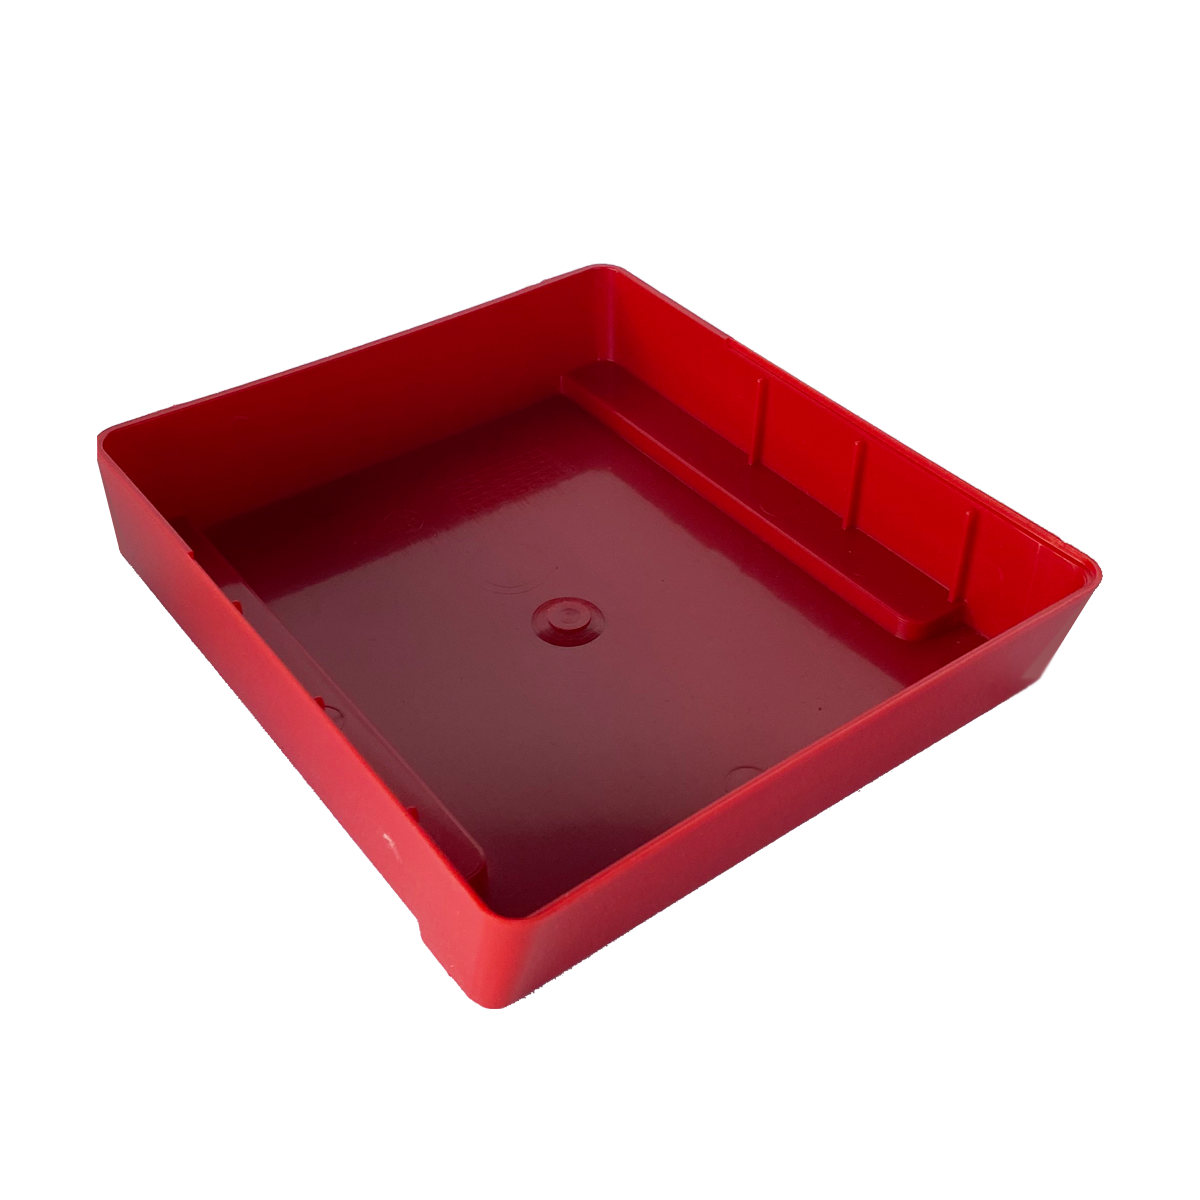 Red plastic tray